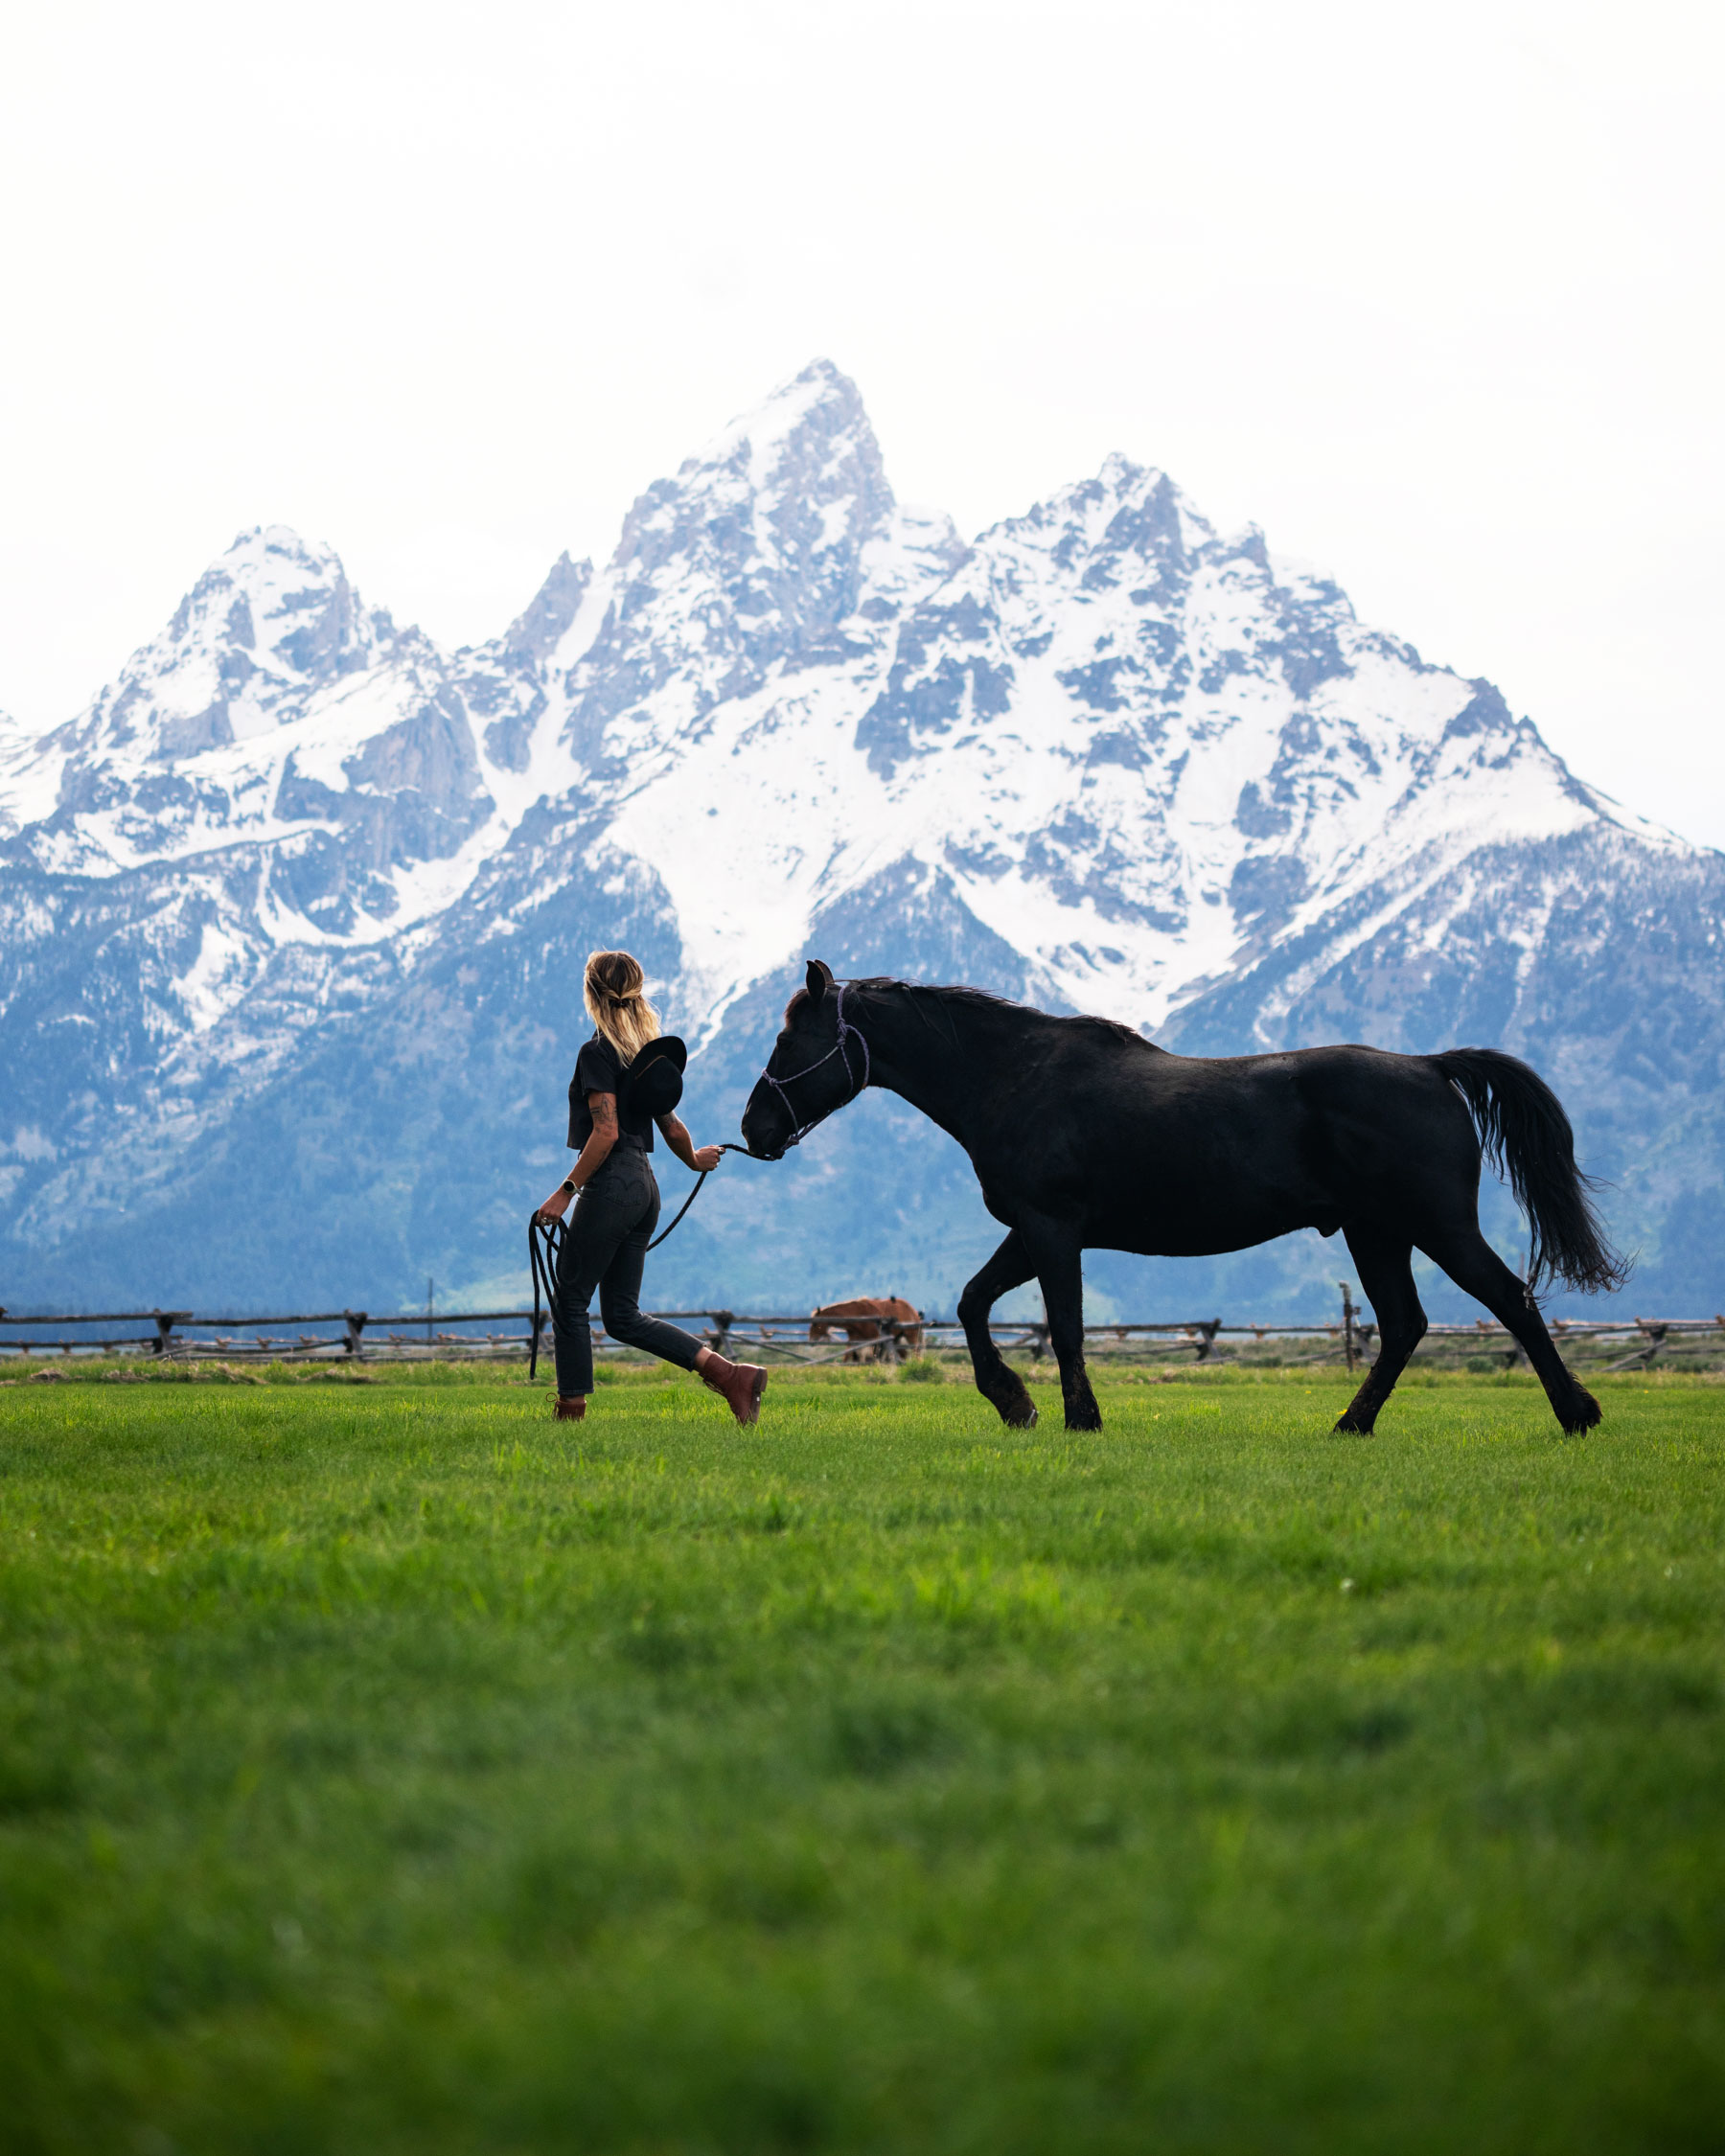 Girl in black dress holds rope of her black horse, twirling in grassy land, admiring snowy mountain views in the distance.